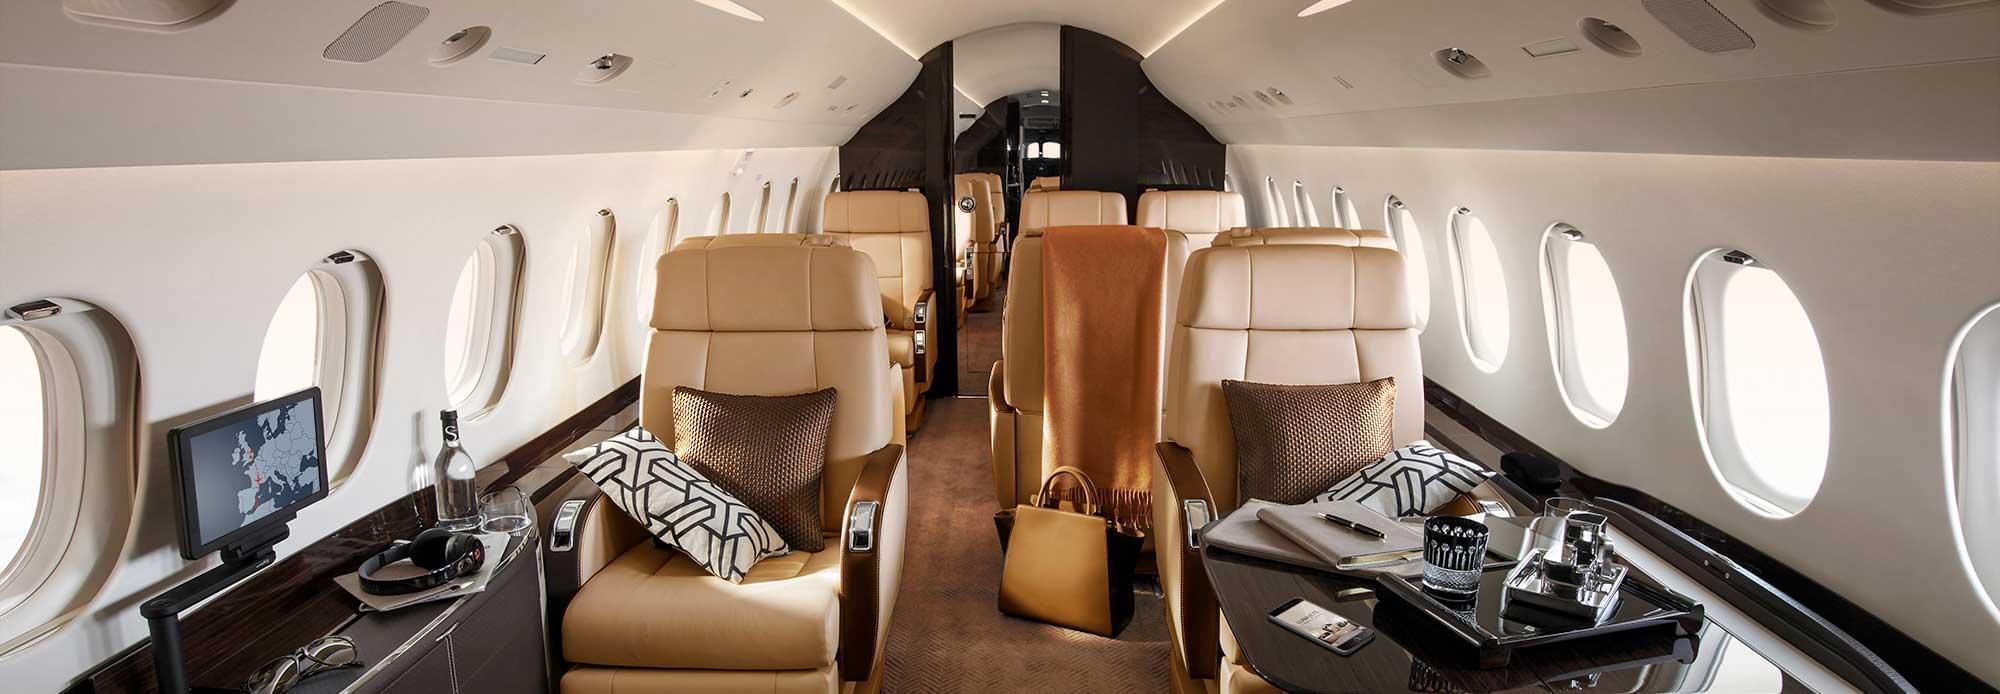 Advantages of Using the Private Jet Charters Services